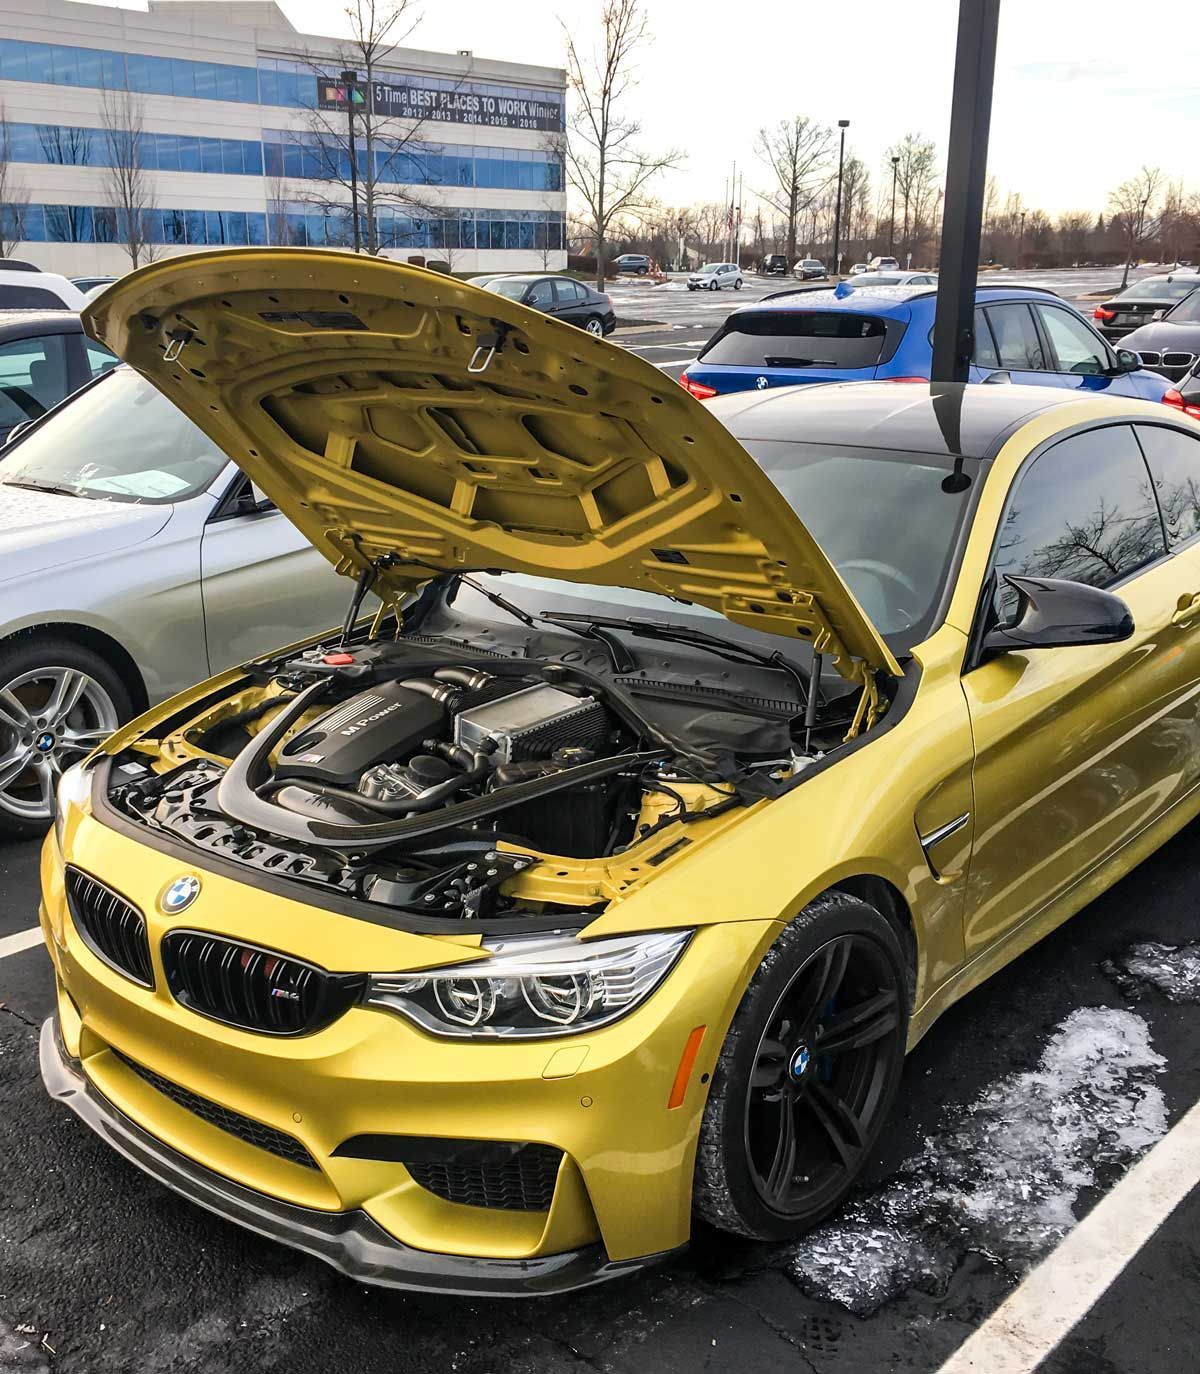 BMW M4 with the hood open showing S55 engine